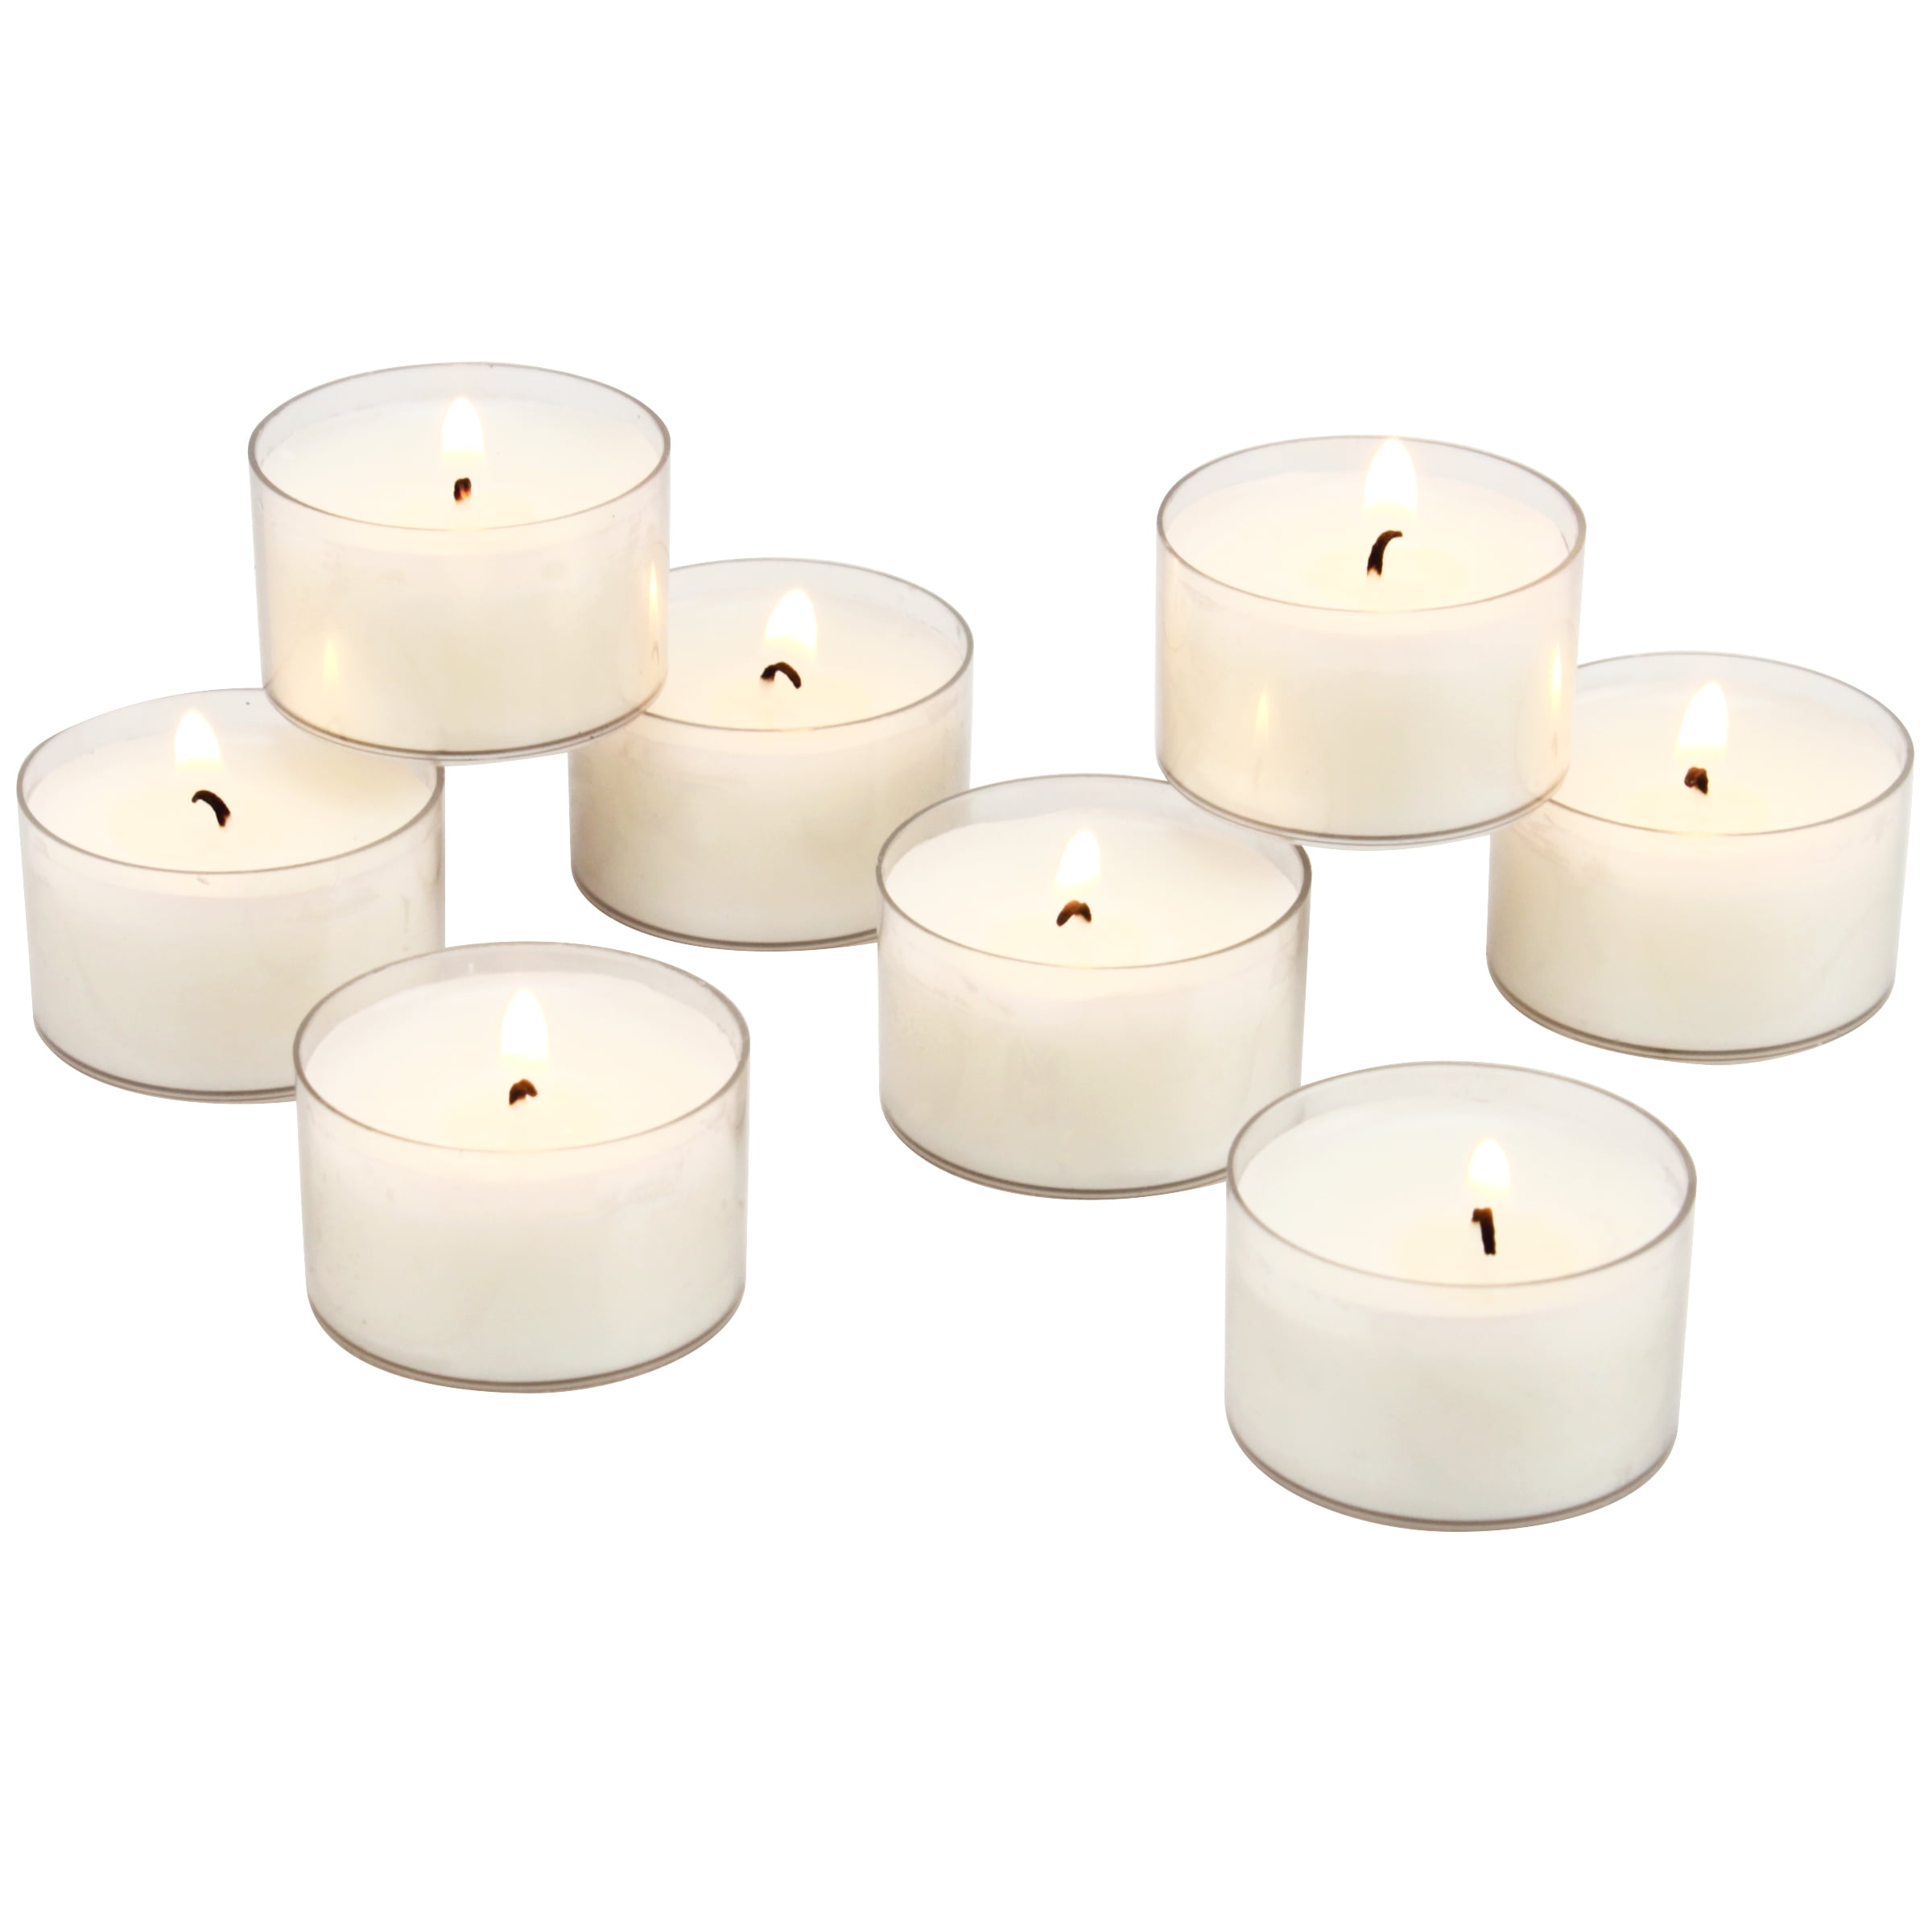 Unscented Tealight Candles Pack Smokeless /& Dripless Tea Light Candles for Home Simple Craft 25 Pack Tea Lights Candles Weddings Parties Long Lasting Paraffin Wax Small Candles in Bulk